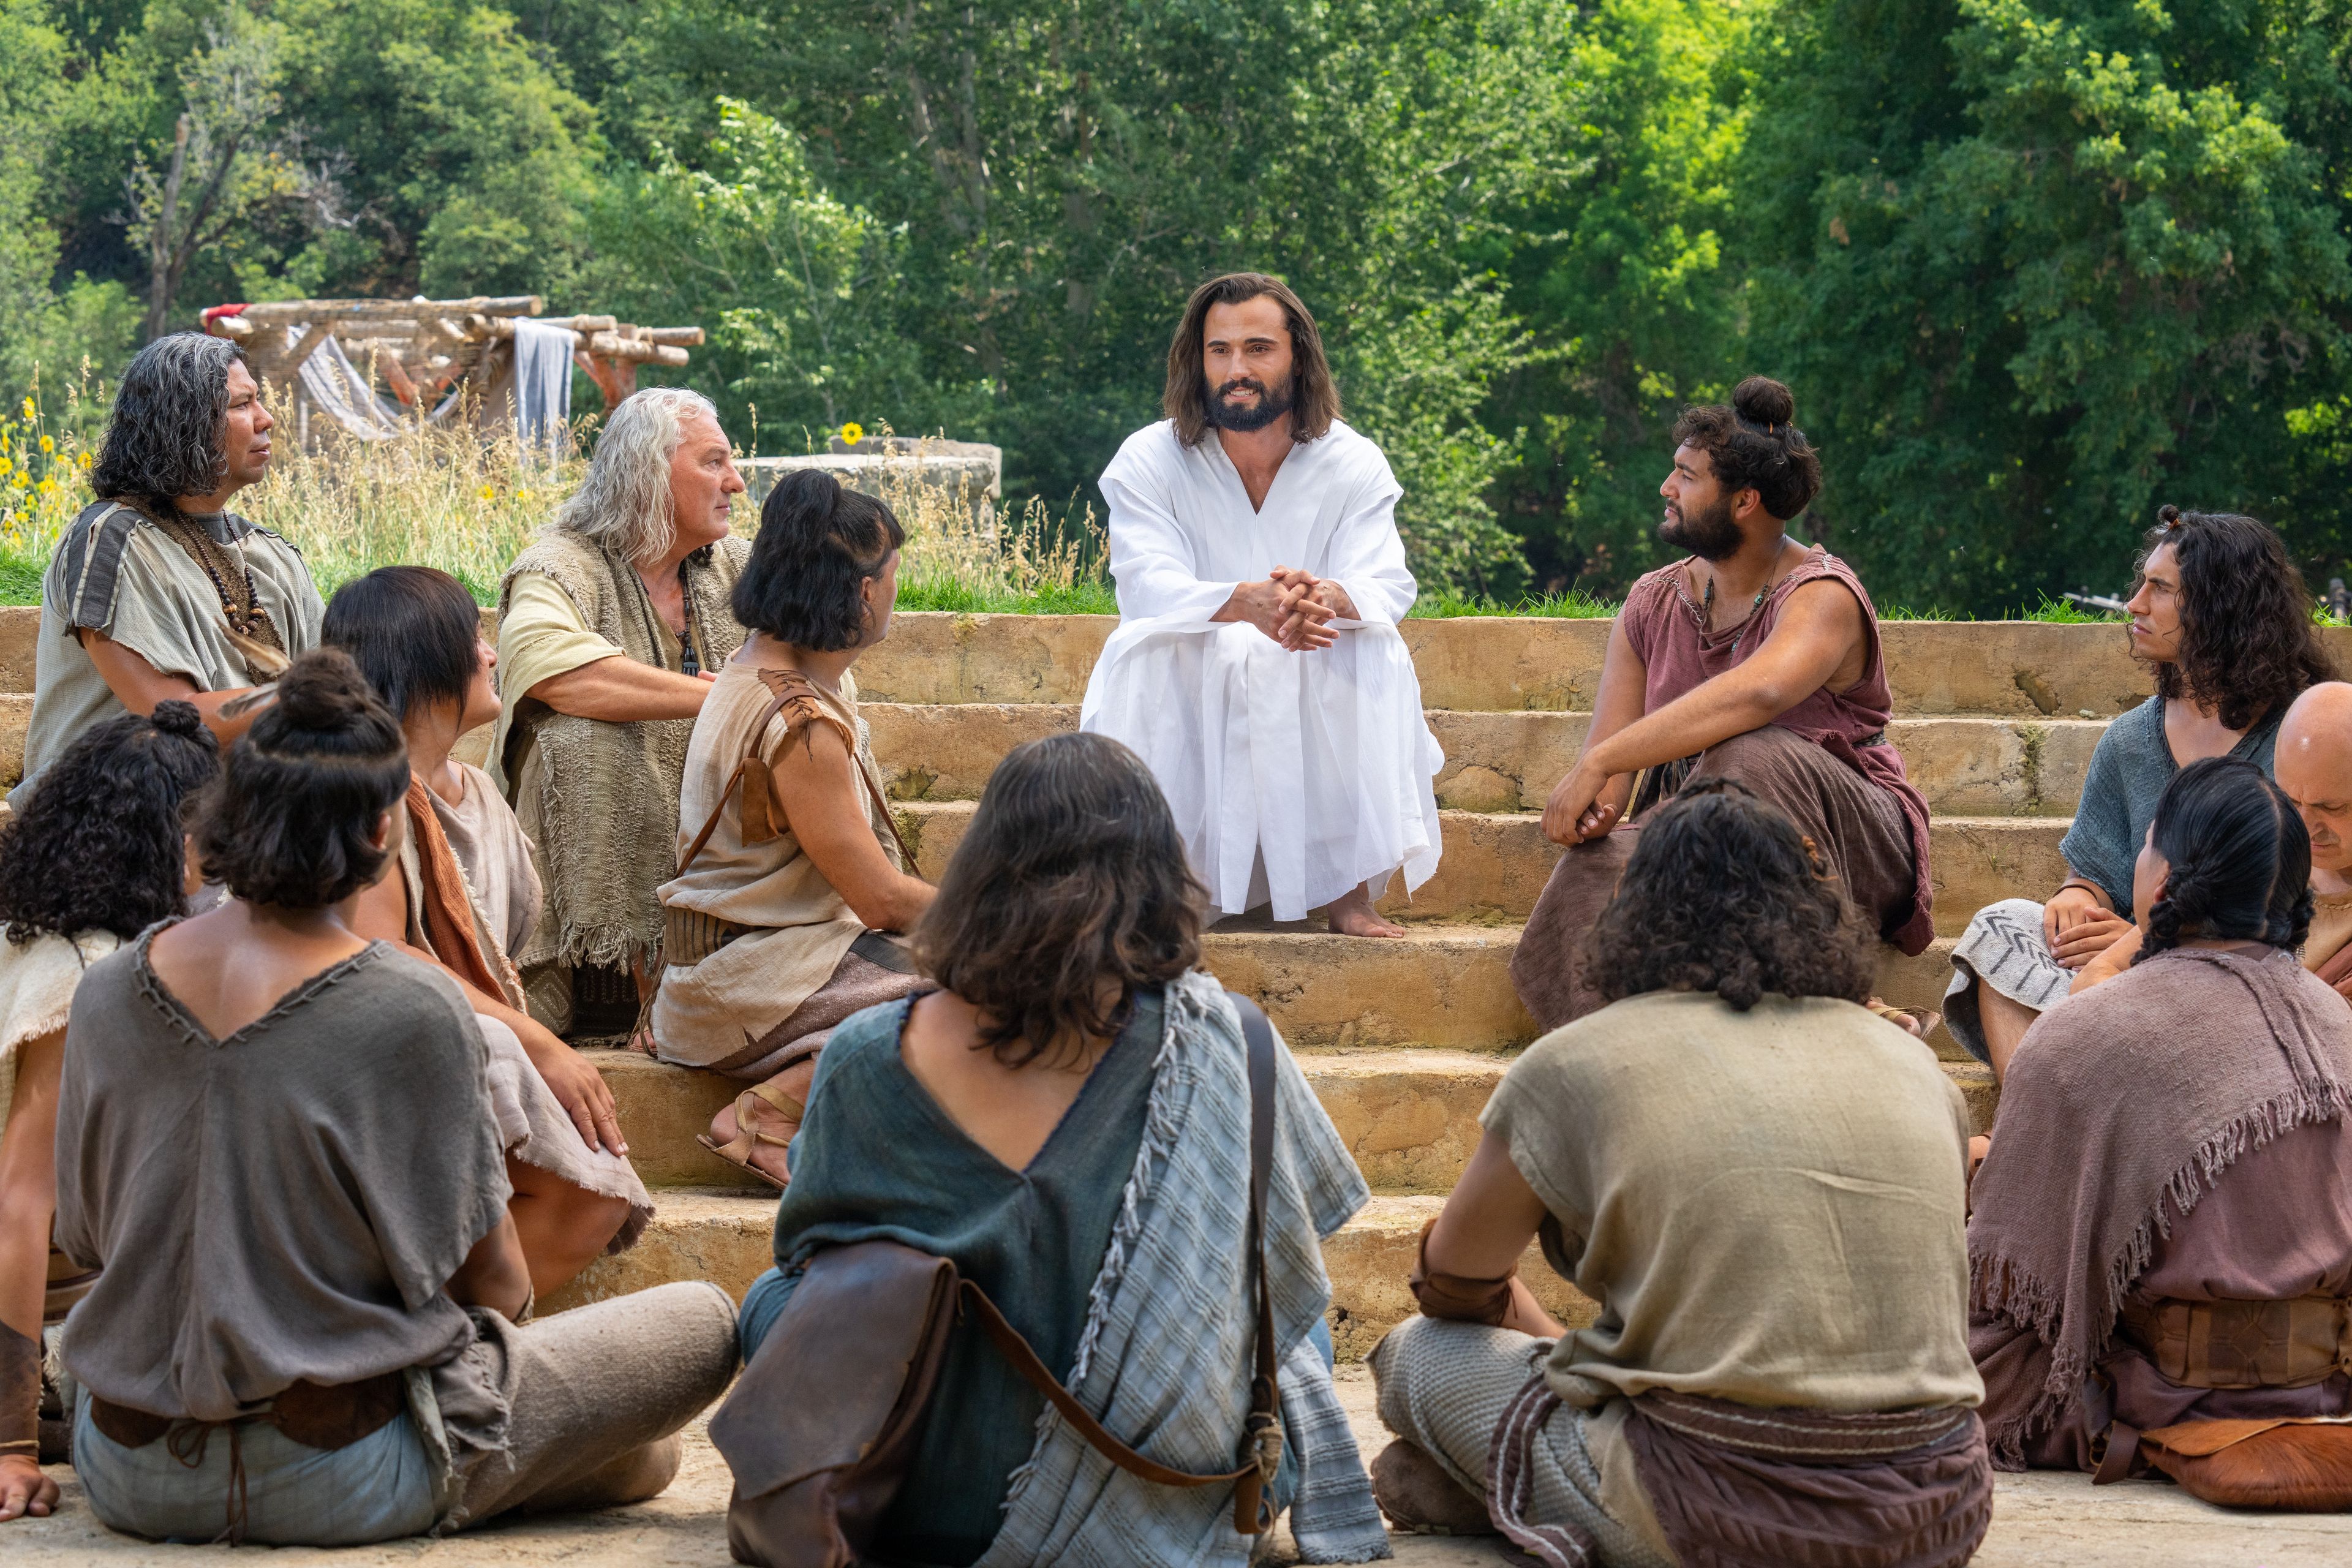 Jesus appears and emphasizes the use of His name to the disciples.